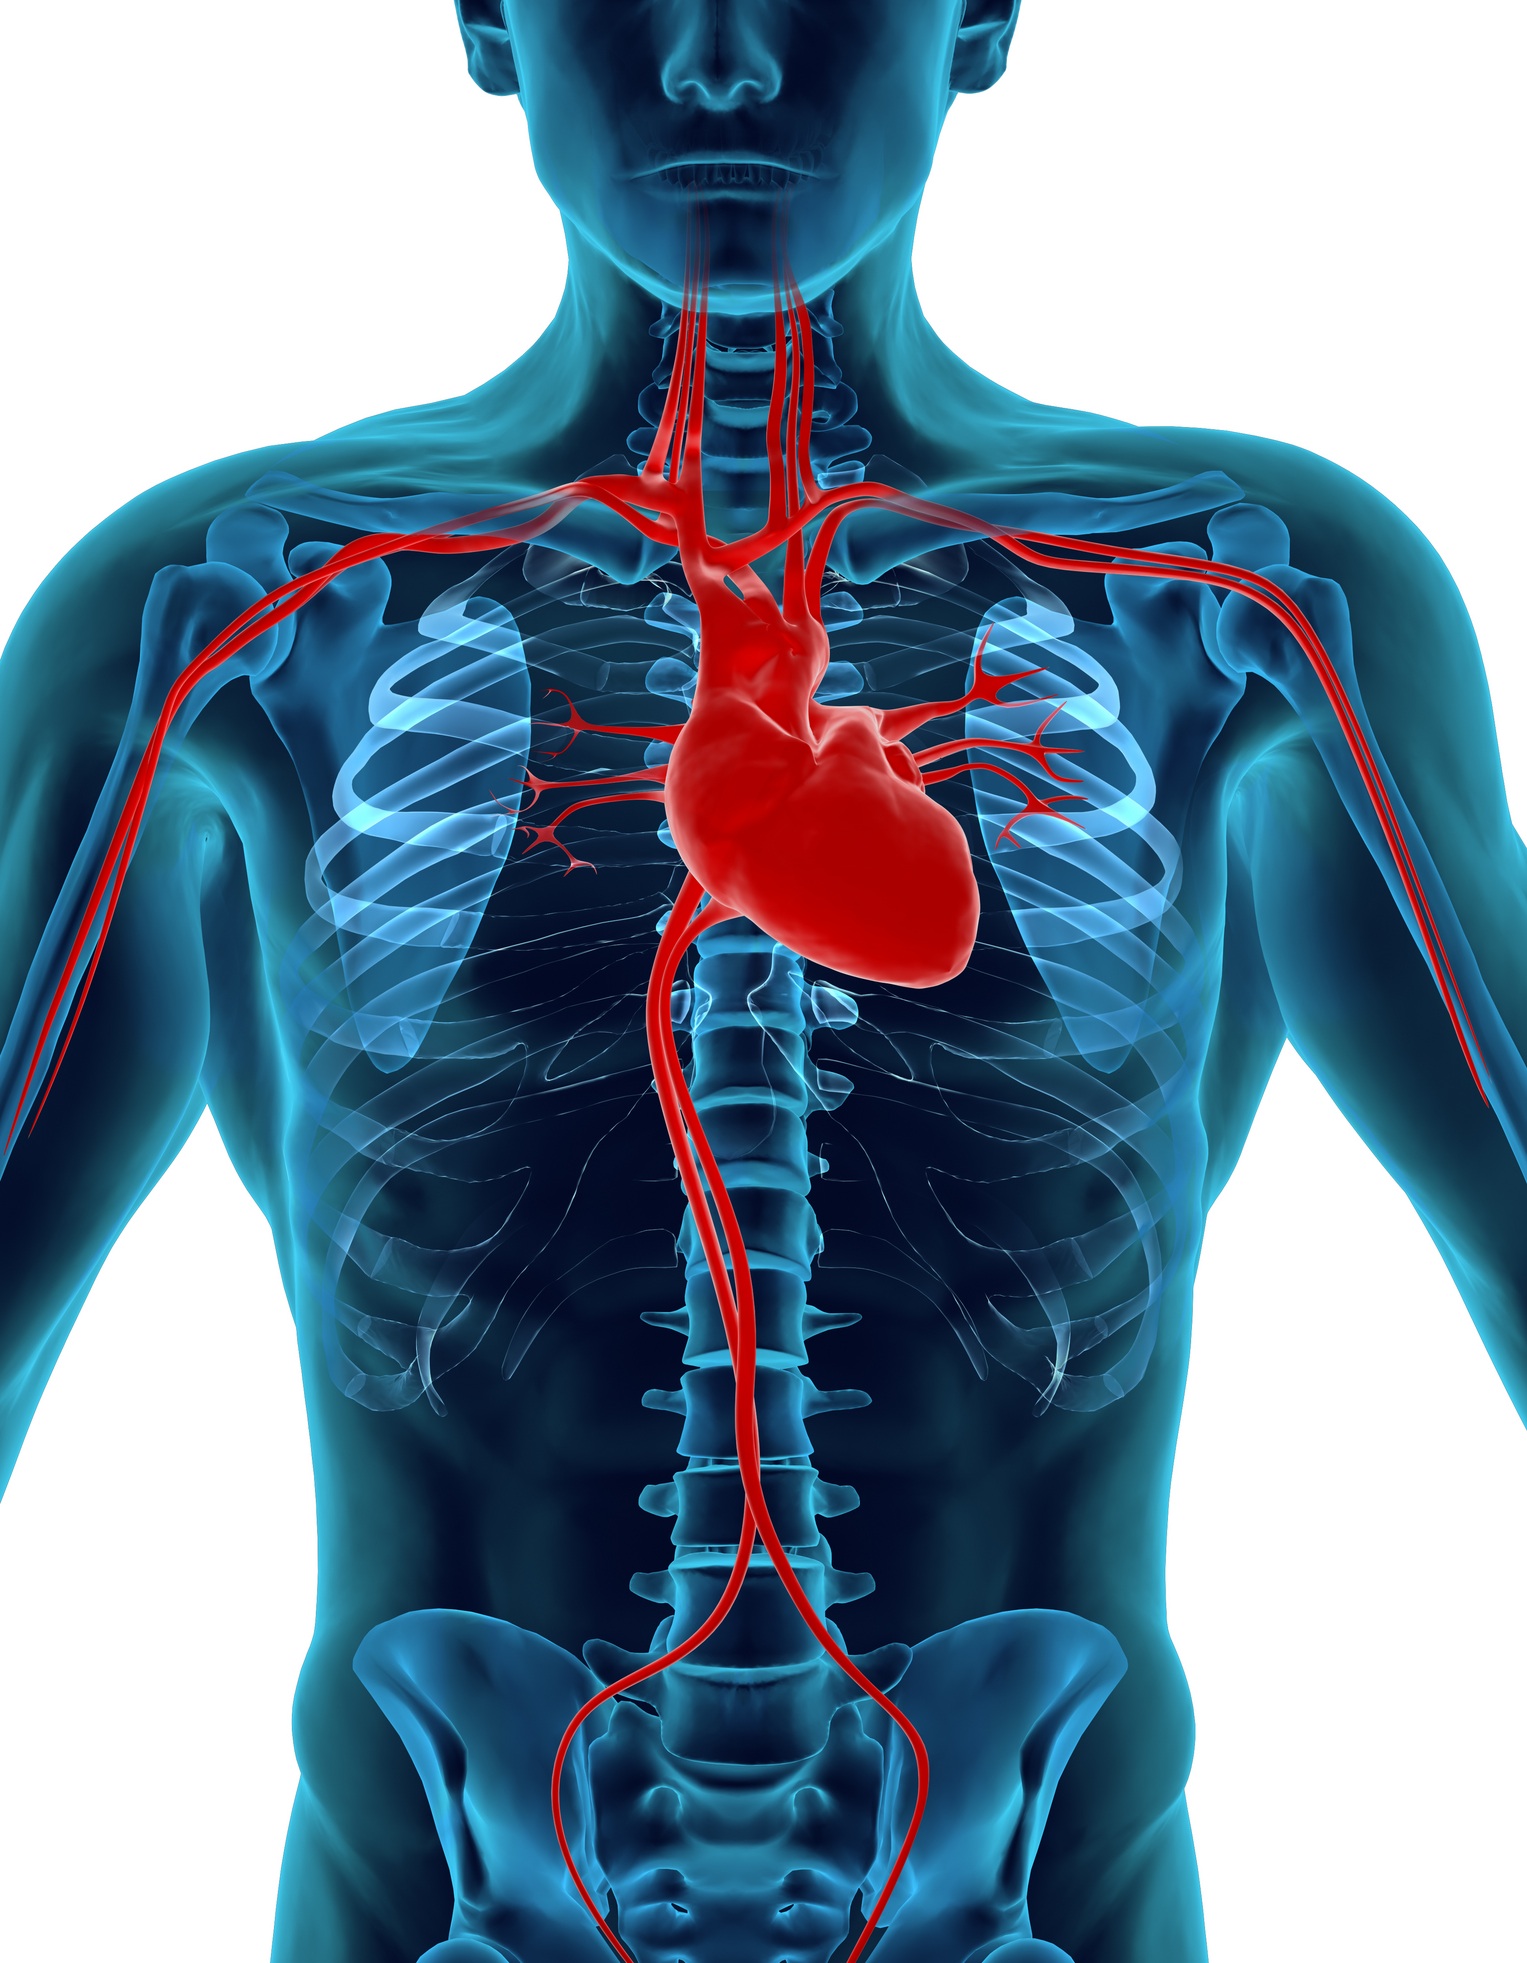 Top 10 Most Interesting Facts About Human Heart | TopTeny 2015